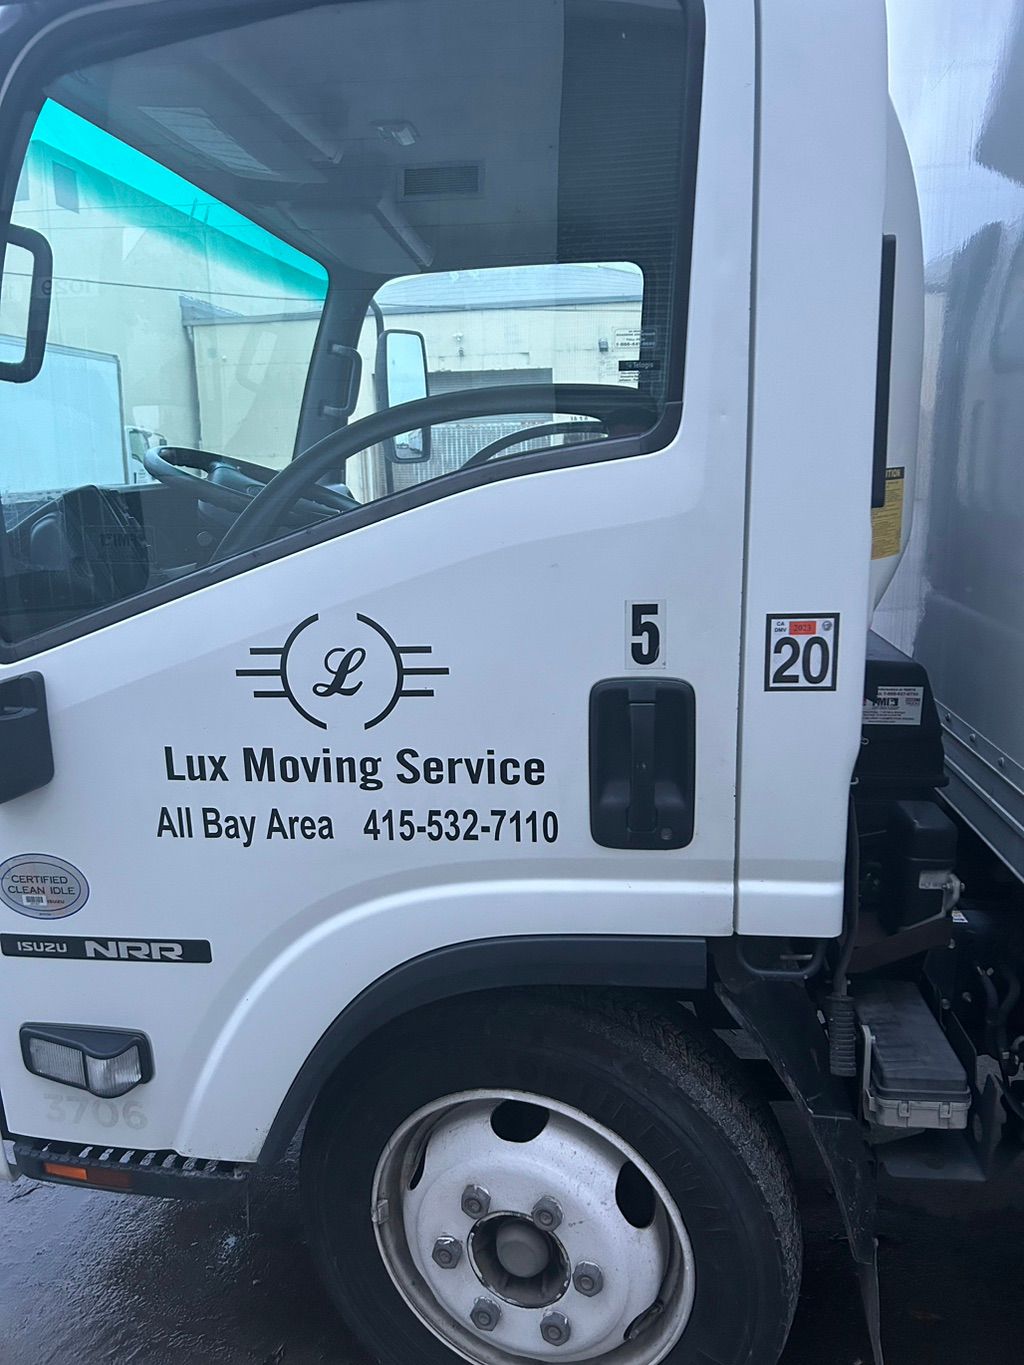 Lux Moving service